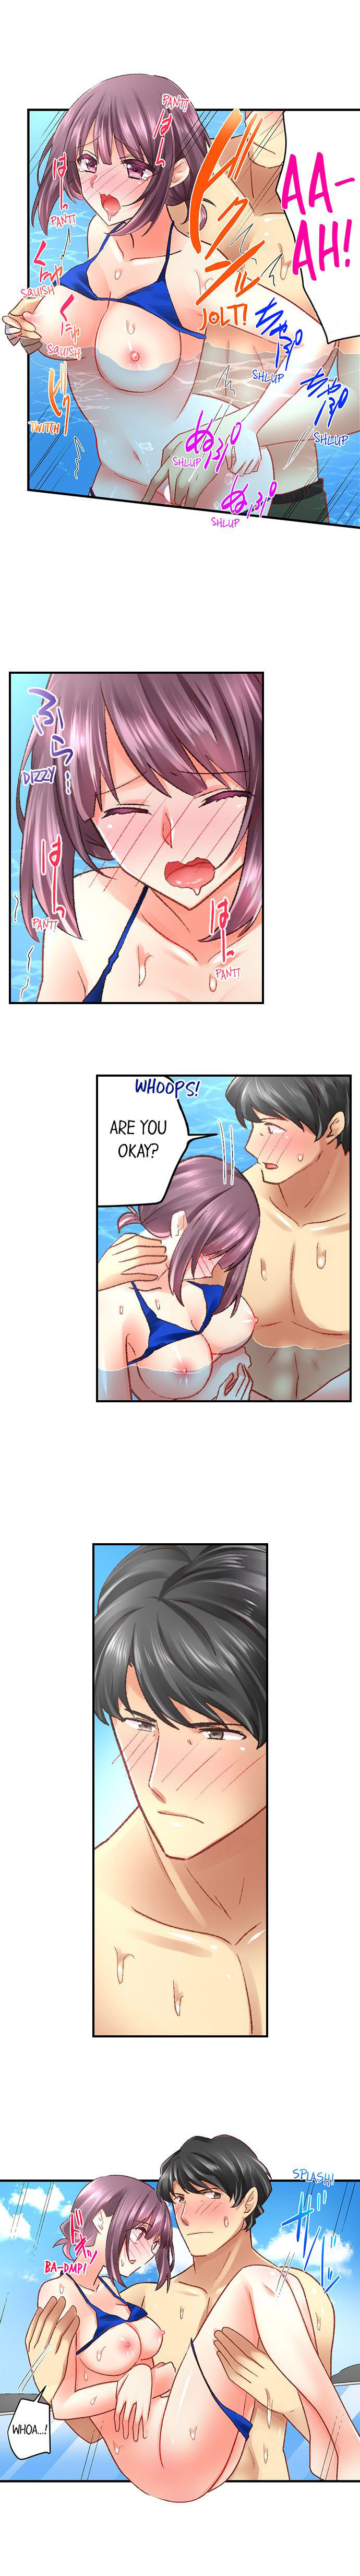 Our Kinky Newlywed Life - Chapter 47 Page 8